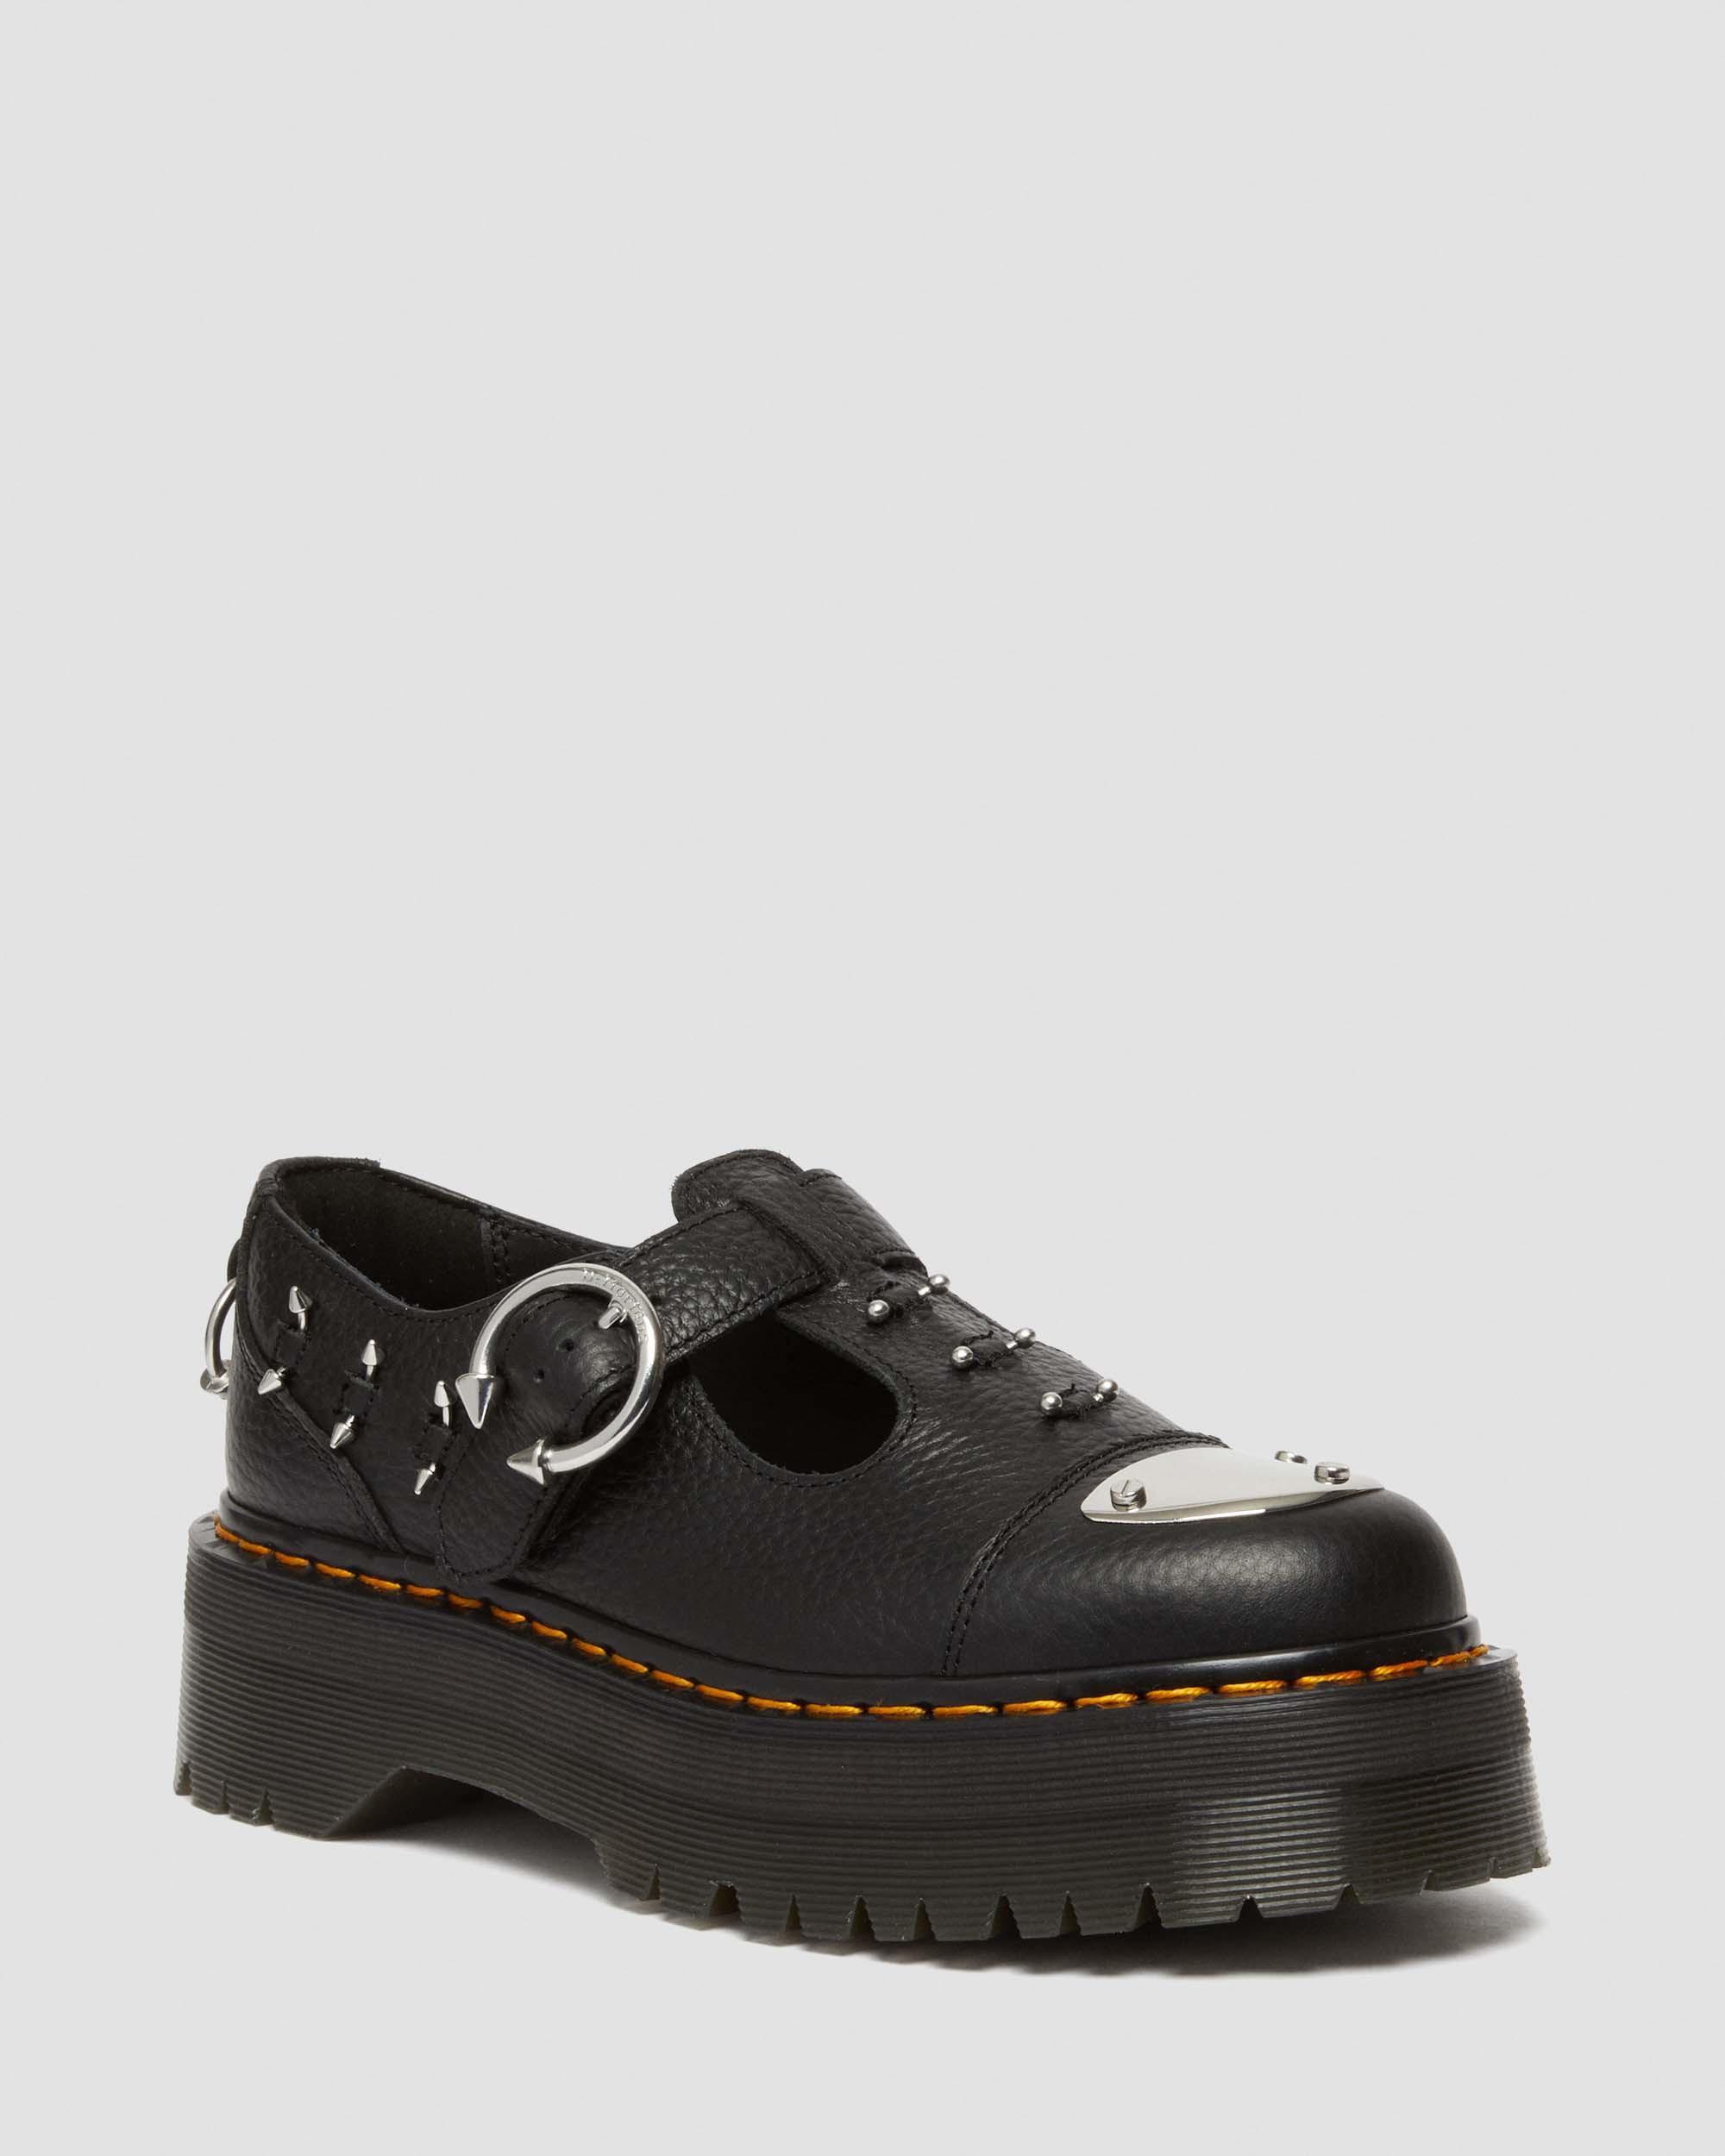 Bethan Piercing Leather Platform Mary Jane Shoes in Black | Dr